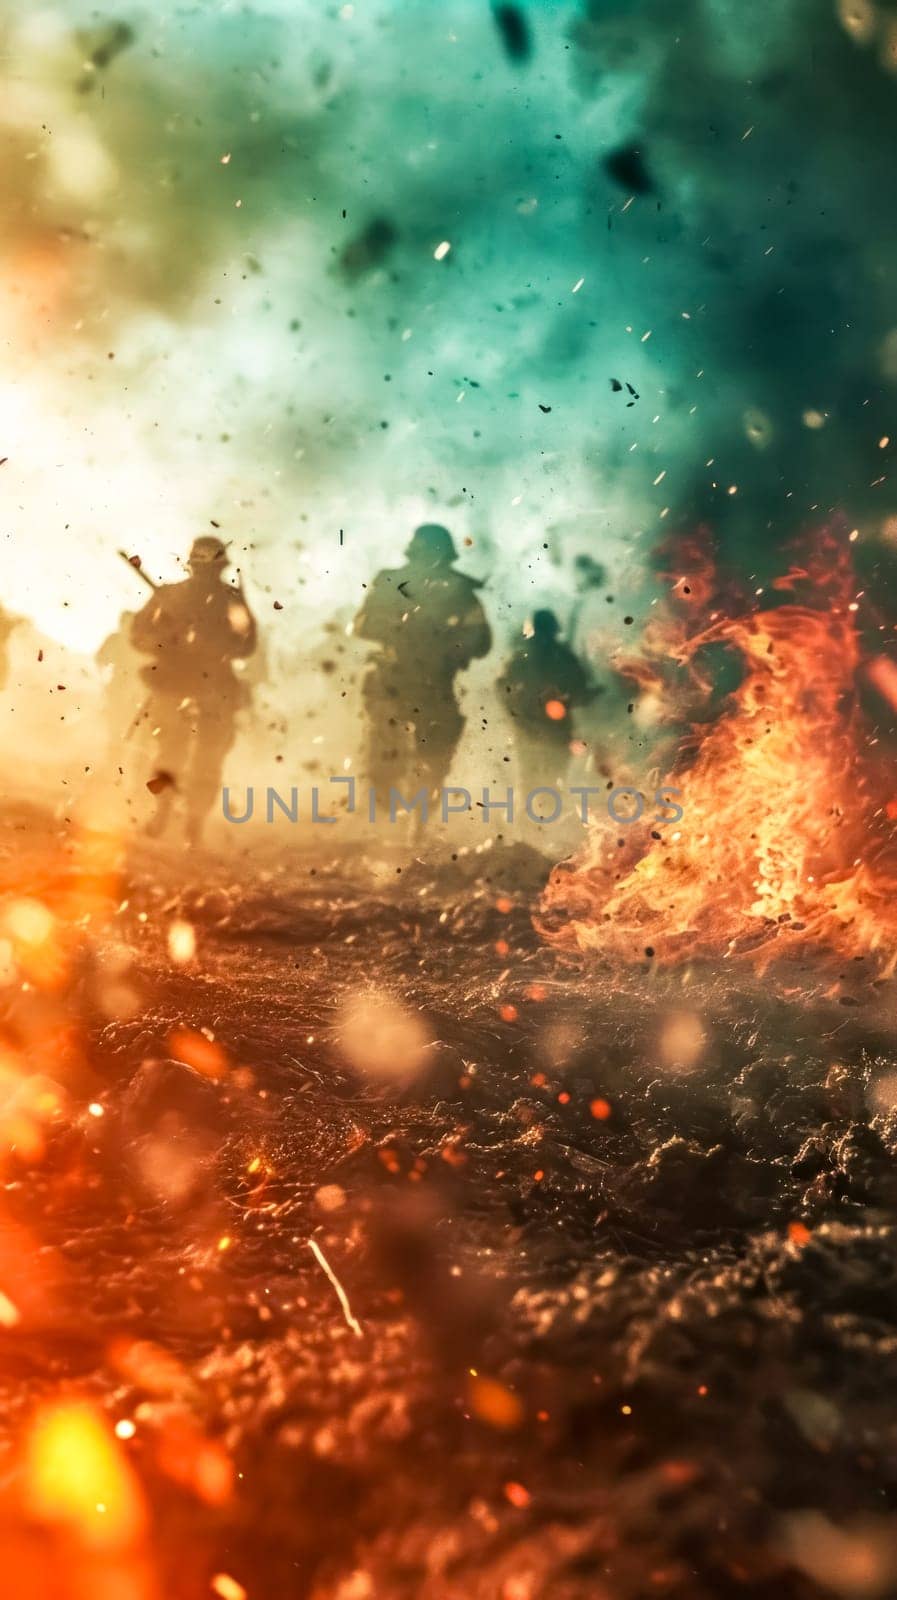 conflict, with figures that could be interpreted as soldiers moving through an environment that appears chaotic and engulfed in flames. The blur and fiery elements suggest movement, turmoil, war zone by Edophoto